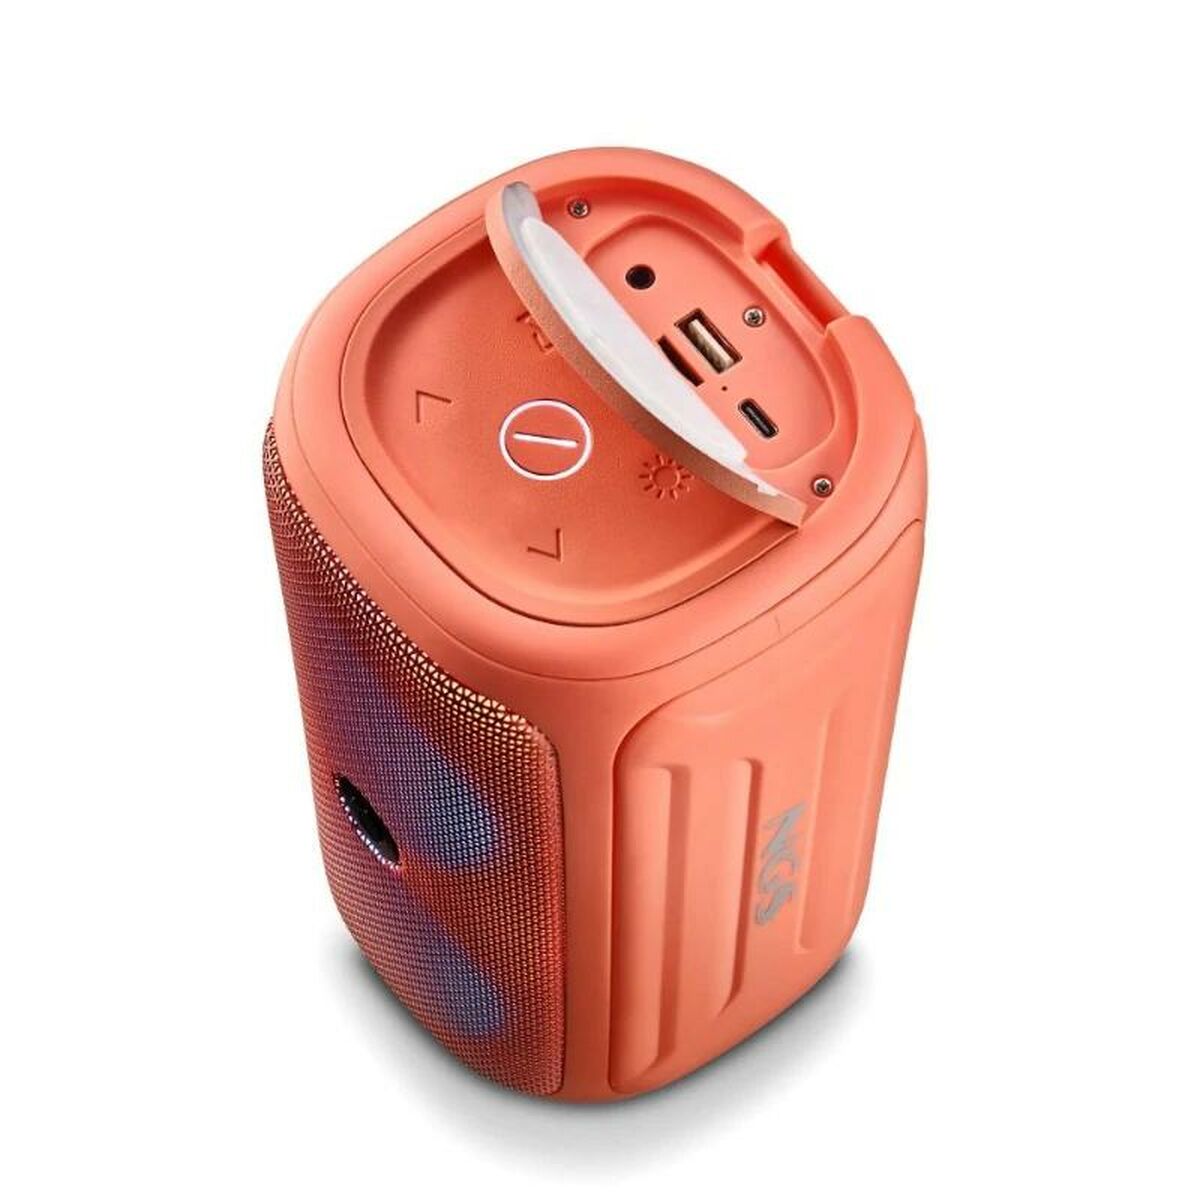 Portable Bluetooth Speakers NGS ROLLERBEAST, NGS, Electronics, Mobile communication and accessories, portable-bluetooth-speakers-ngs-rollerbeast, Brand_NGS, category-reference-2609, category-reference-2882, category-reference-2923, category-reference-t-19653, category-reference-t-21311, category-reference-t-4036, category-reference-t-4037, Condition_NEW, entertainment, music, Price_50 - 100, telephones & tablets, wifi y bluetooth, RiotNook